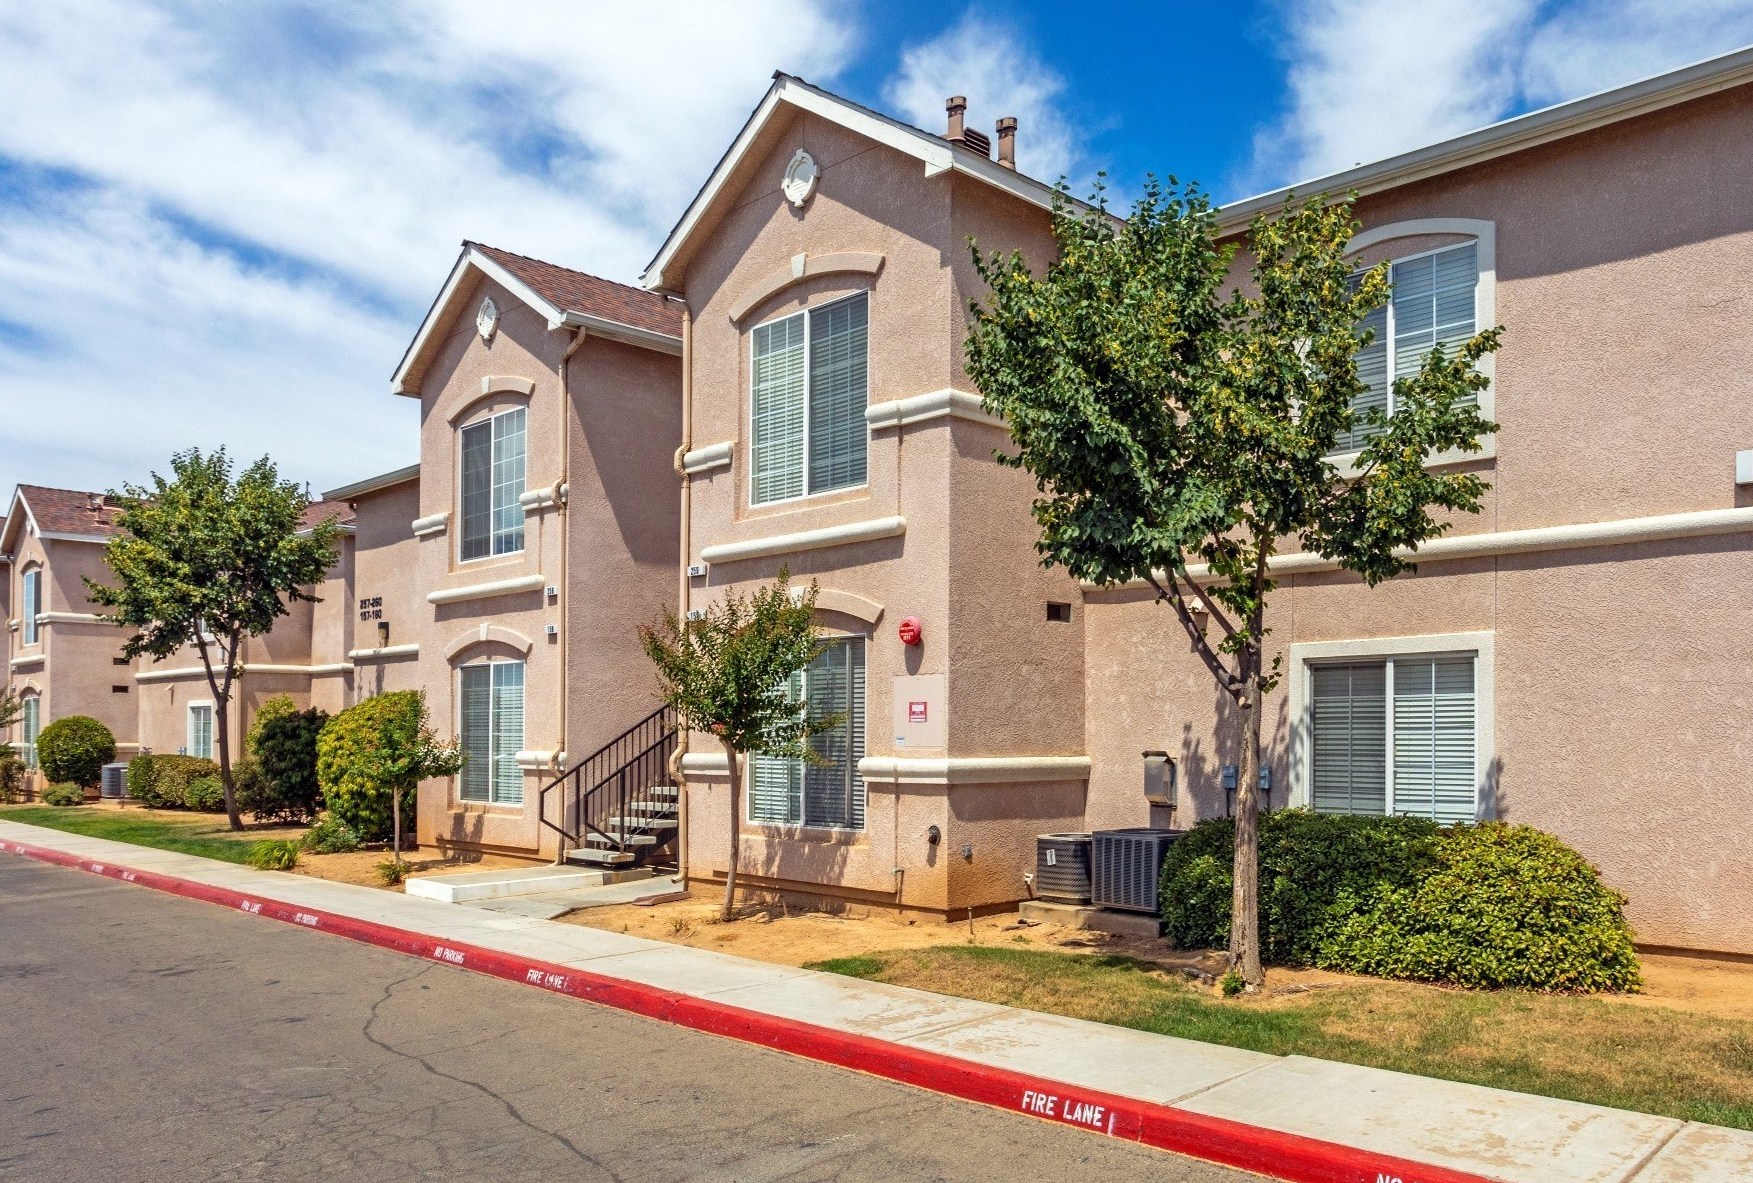 The Bascom Group Expands Central Valley Presence With $44.5 Million Acquisition of 236-Unit Multifamily Portfolio in Fresno, California